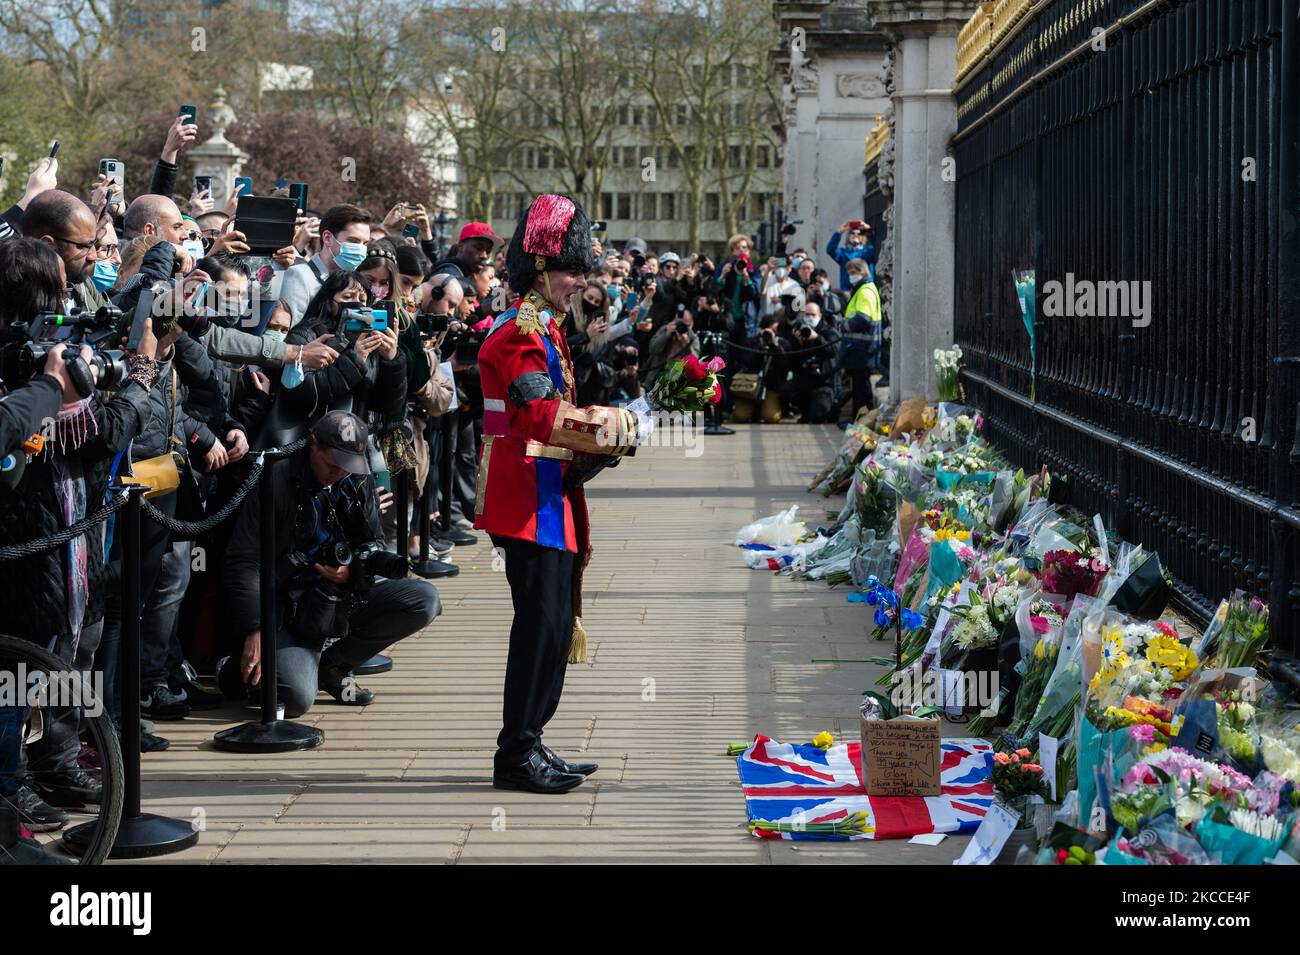 LONDON, UNITED KINGDOM - APRIL 09, 2021: A man wearing ceremonial uniform leaves flowers outside Buckingham Palace following the announcement of the death of Prince Philip, on 09 April, 2021 in London, England. The Duke of Edinburgh, the Queen's husband of more than seventy years, has died this morning at the age of 99 at Windsor Castle. (Photo by WIktor Szymanowicz/NurPhoto) Stock Photo